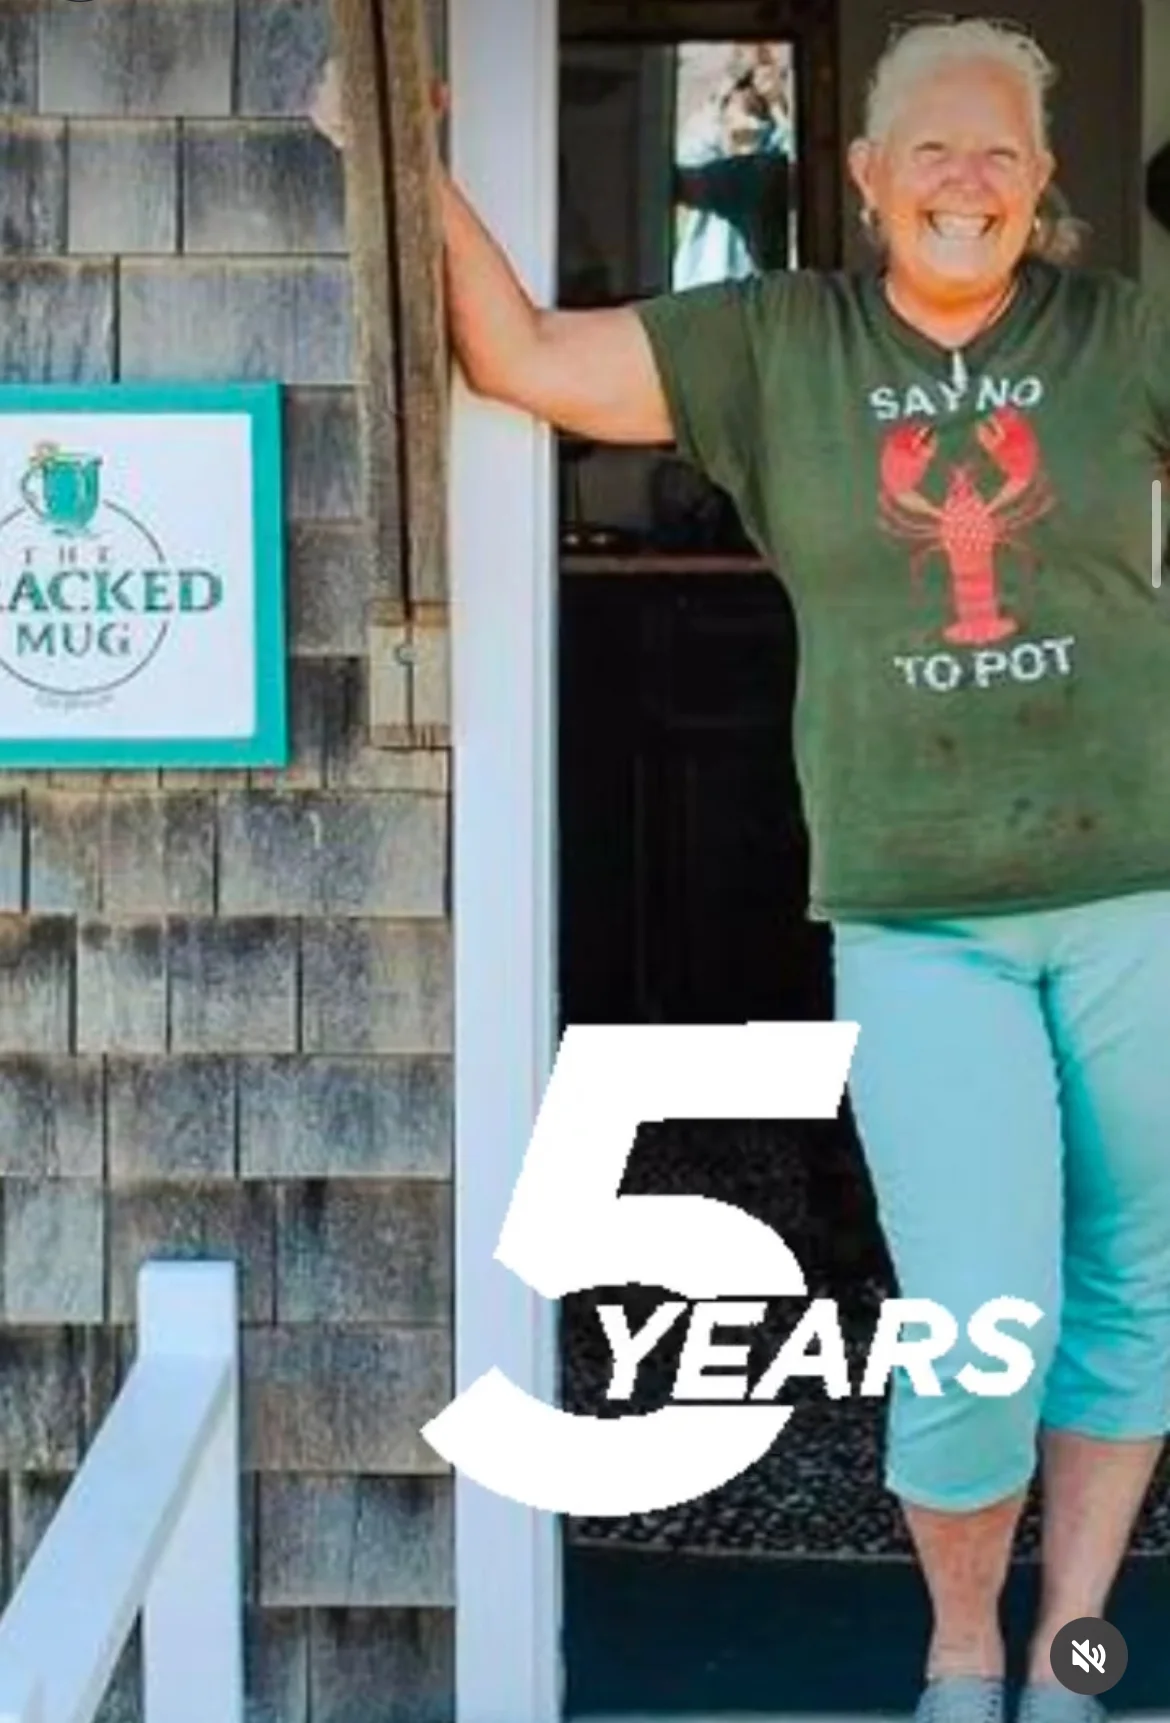 5 years ago Mel moved to Monhegan and opened the Cracked Mug BnB